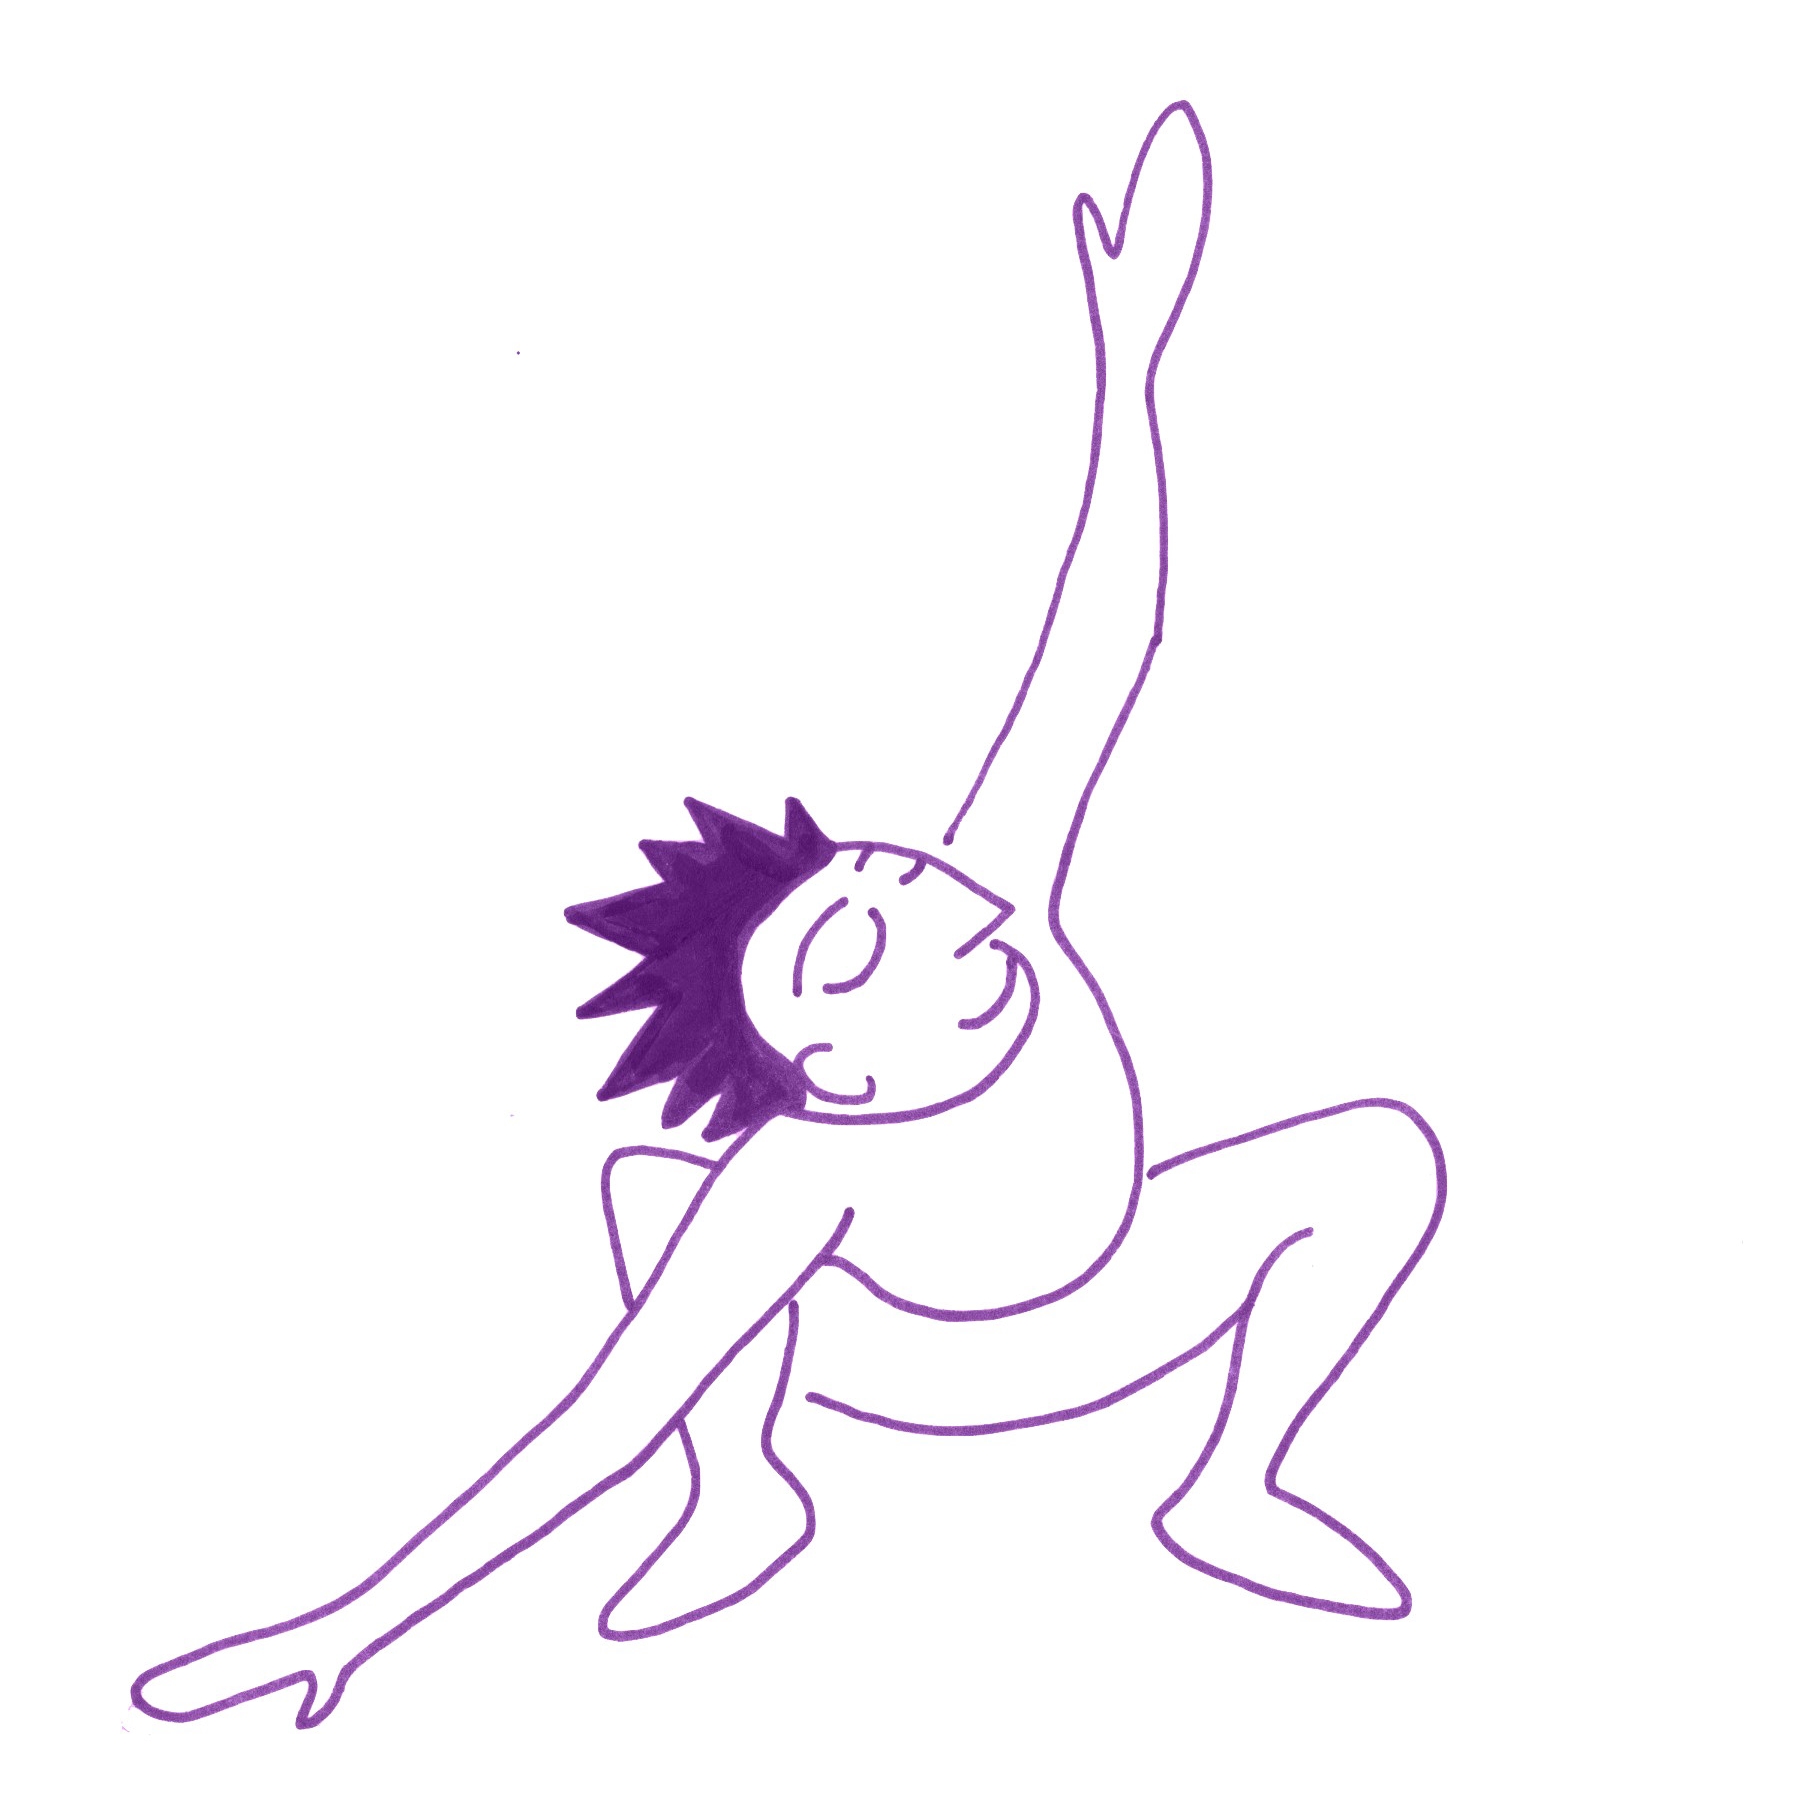 Animal Yoga Poses: Squirrel Pose is Fun for Kids and Great for the Body! —  Yo Re Mi